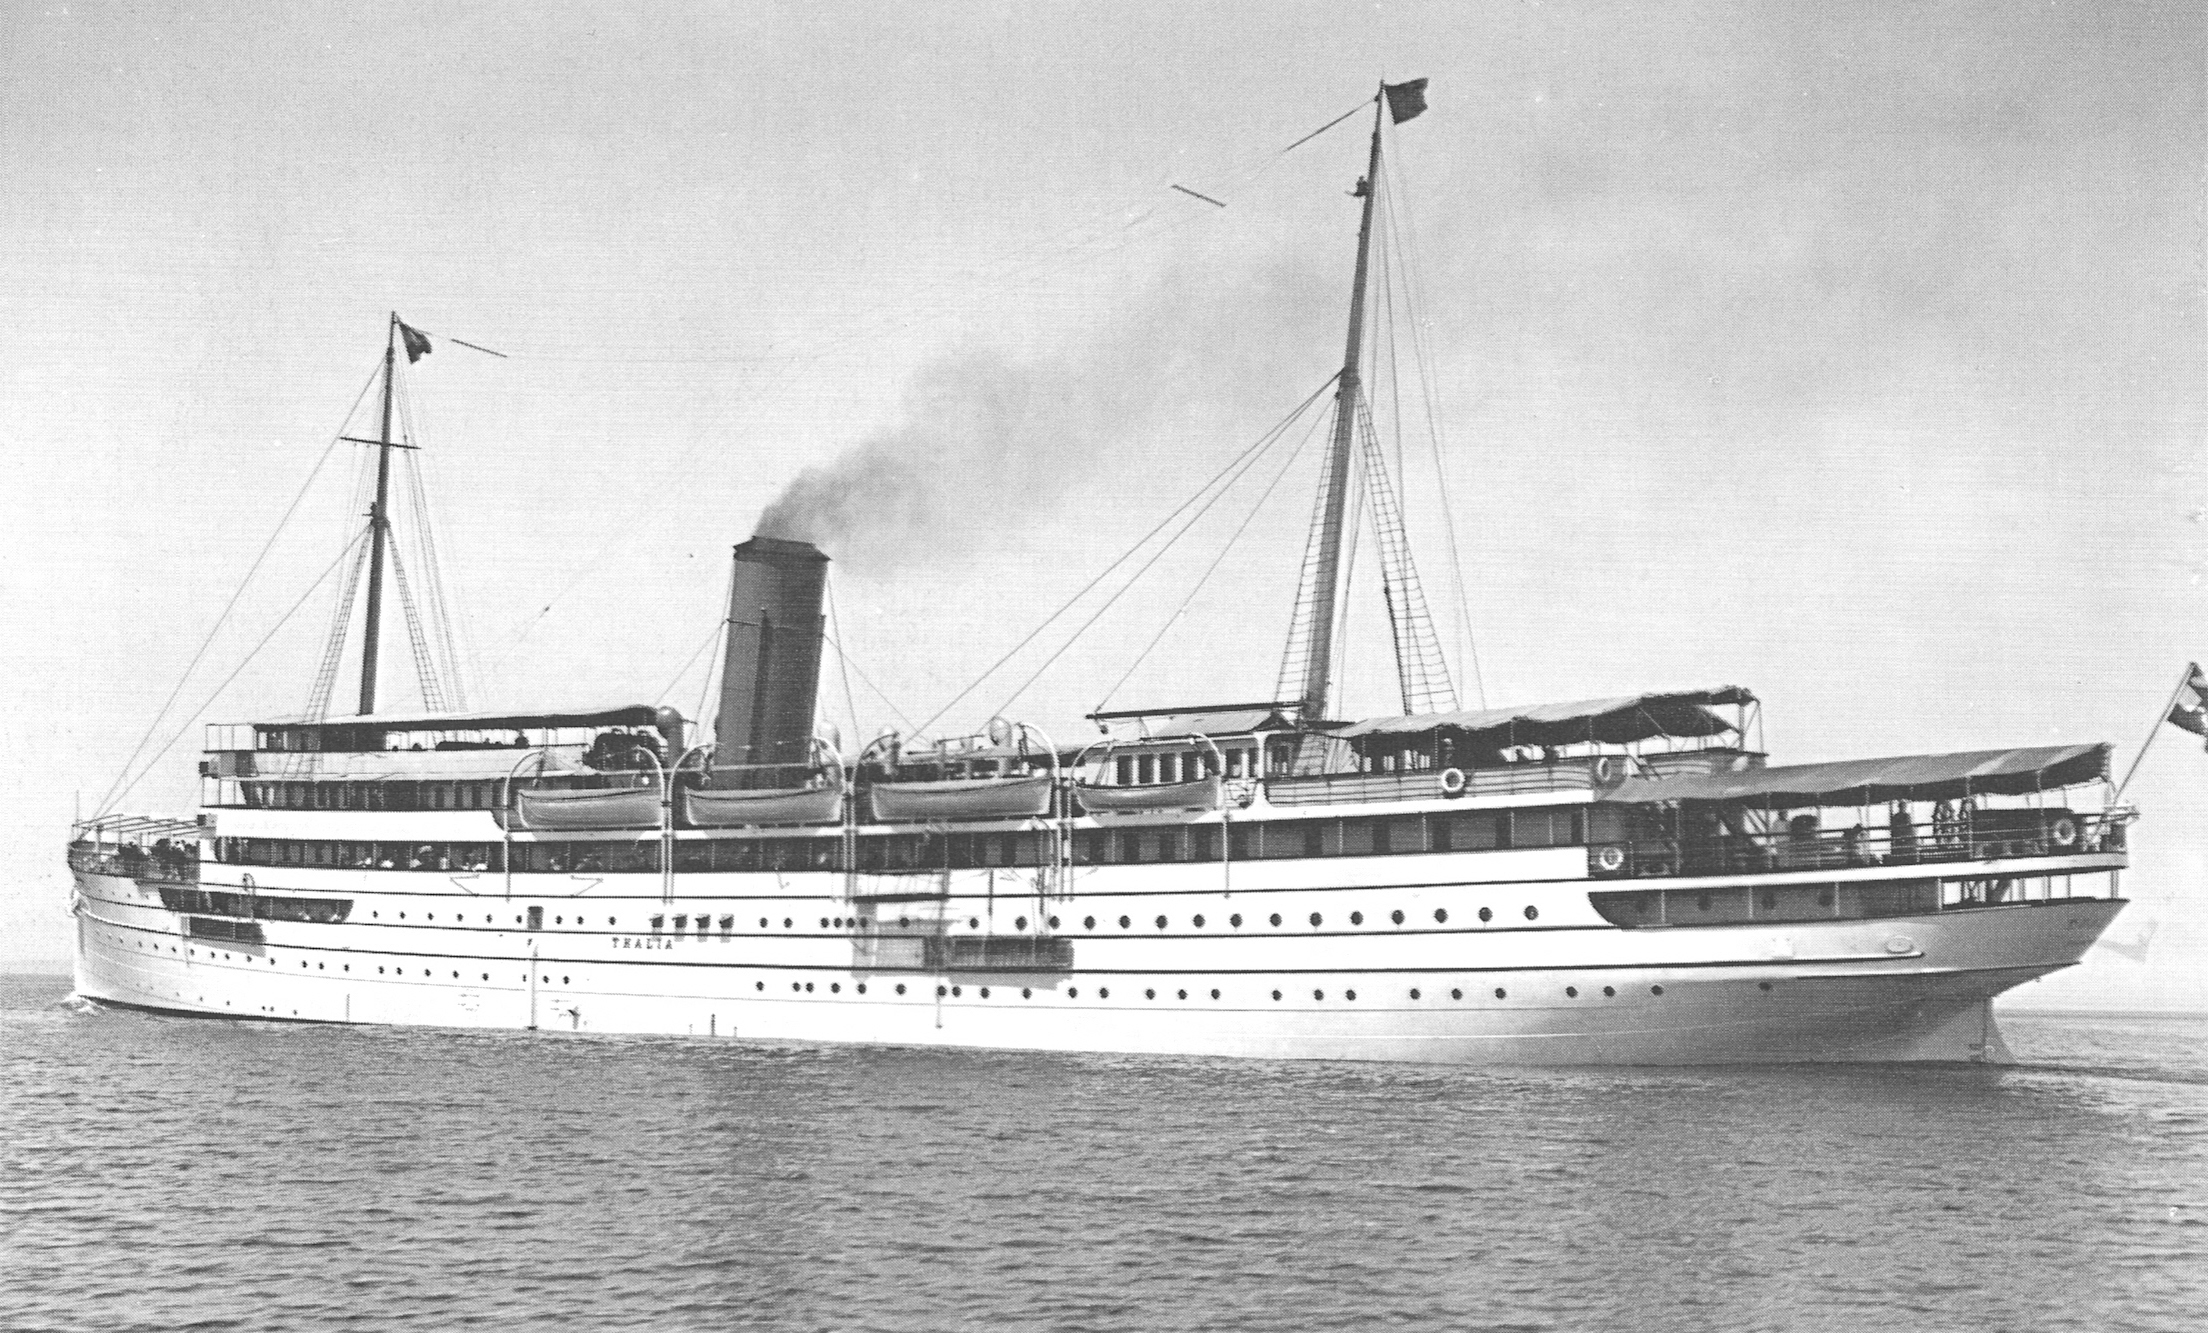 HISTORY - One of the earliest steam ship companies in the world ÖSTERREICHISCHER  LLOYD was founded in 1833 - II 1855-1914